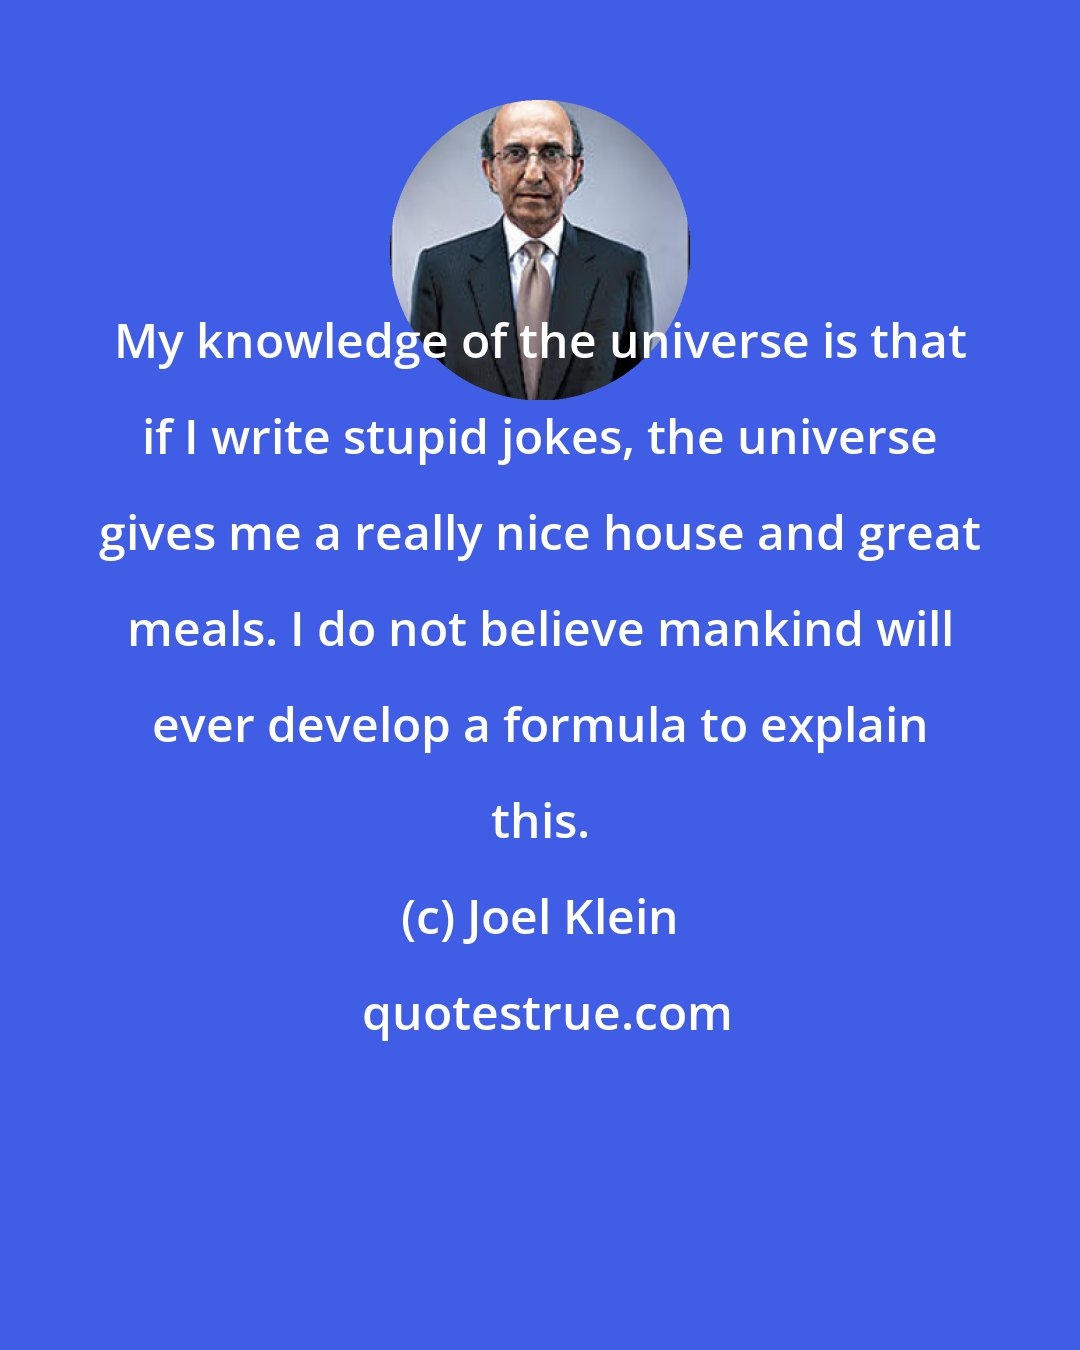 Joel Klein: My knowledge of the universe is that if I write stupid jokes, the universe gives me a really nice house and great meals. I do not believe mankind will ever develop a formula to explain this.